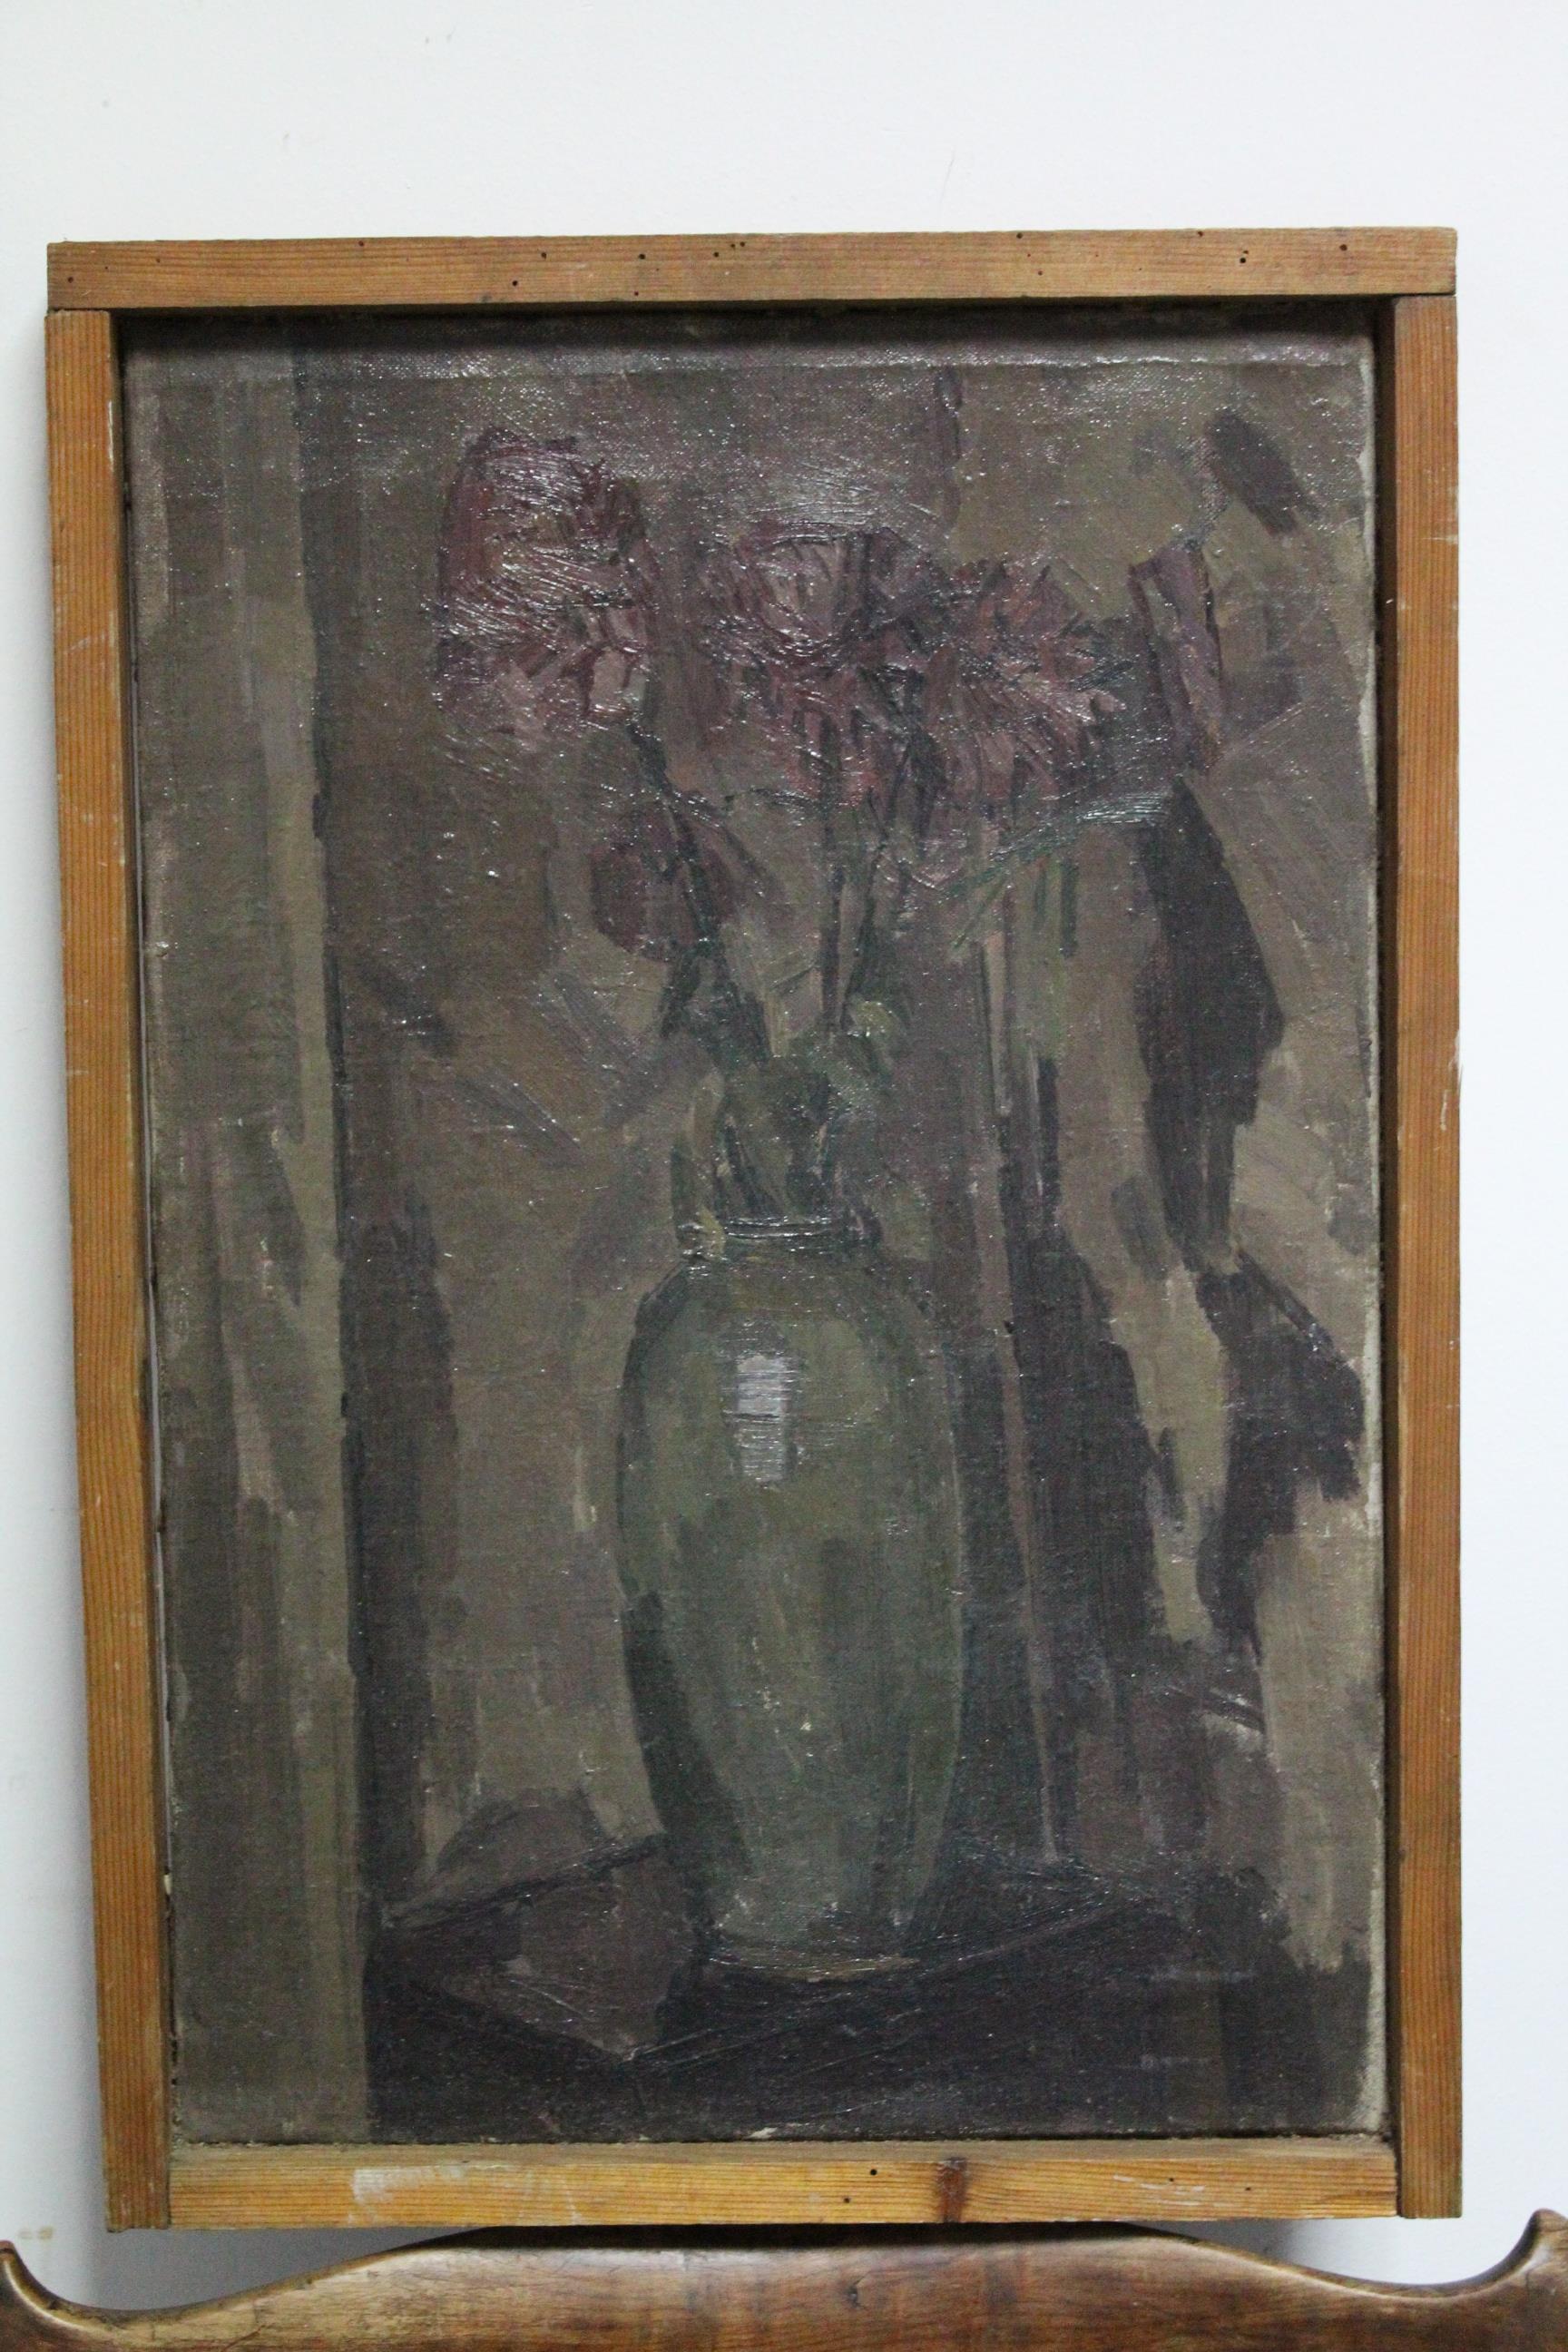 ENGLISH SCHOOL, 20th century, still life study of flowers in a vase, oil on canvas, 18" x 12"; a po